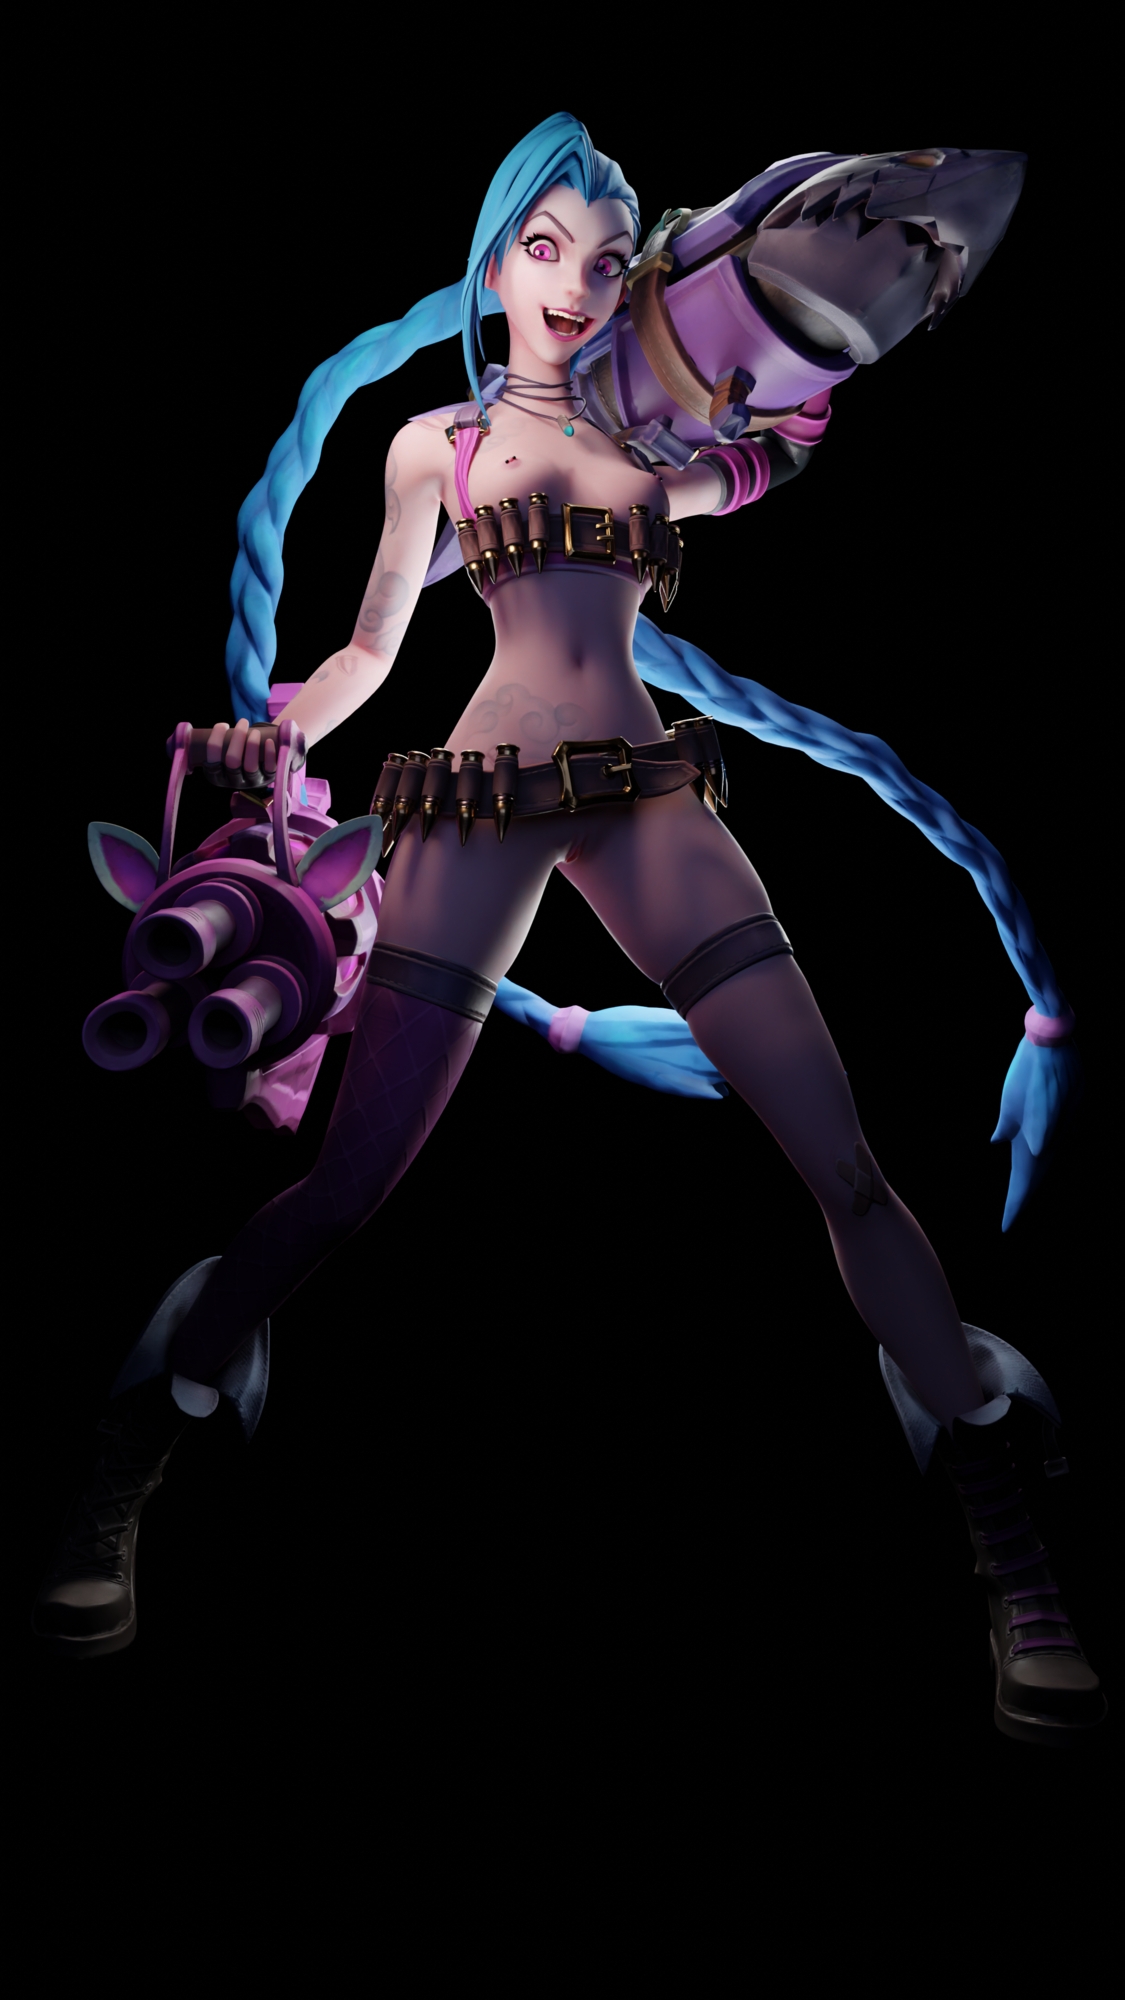 Jinx poster Jinx League Of Legends Posing Poster Small Boobs Small Breasts Small Tits Nipple Piercing